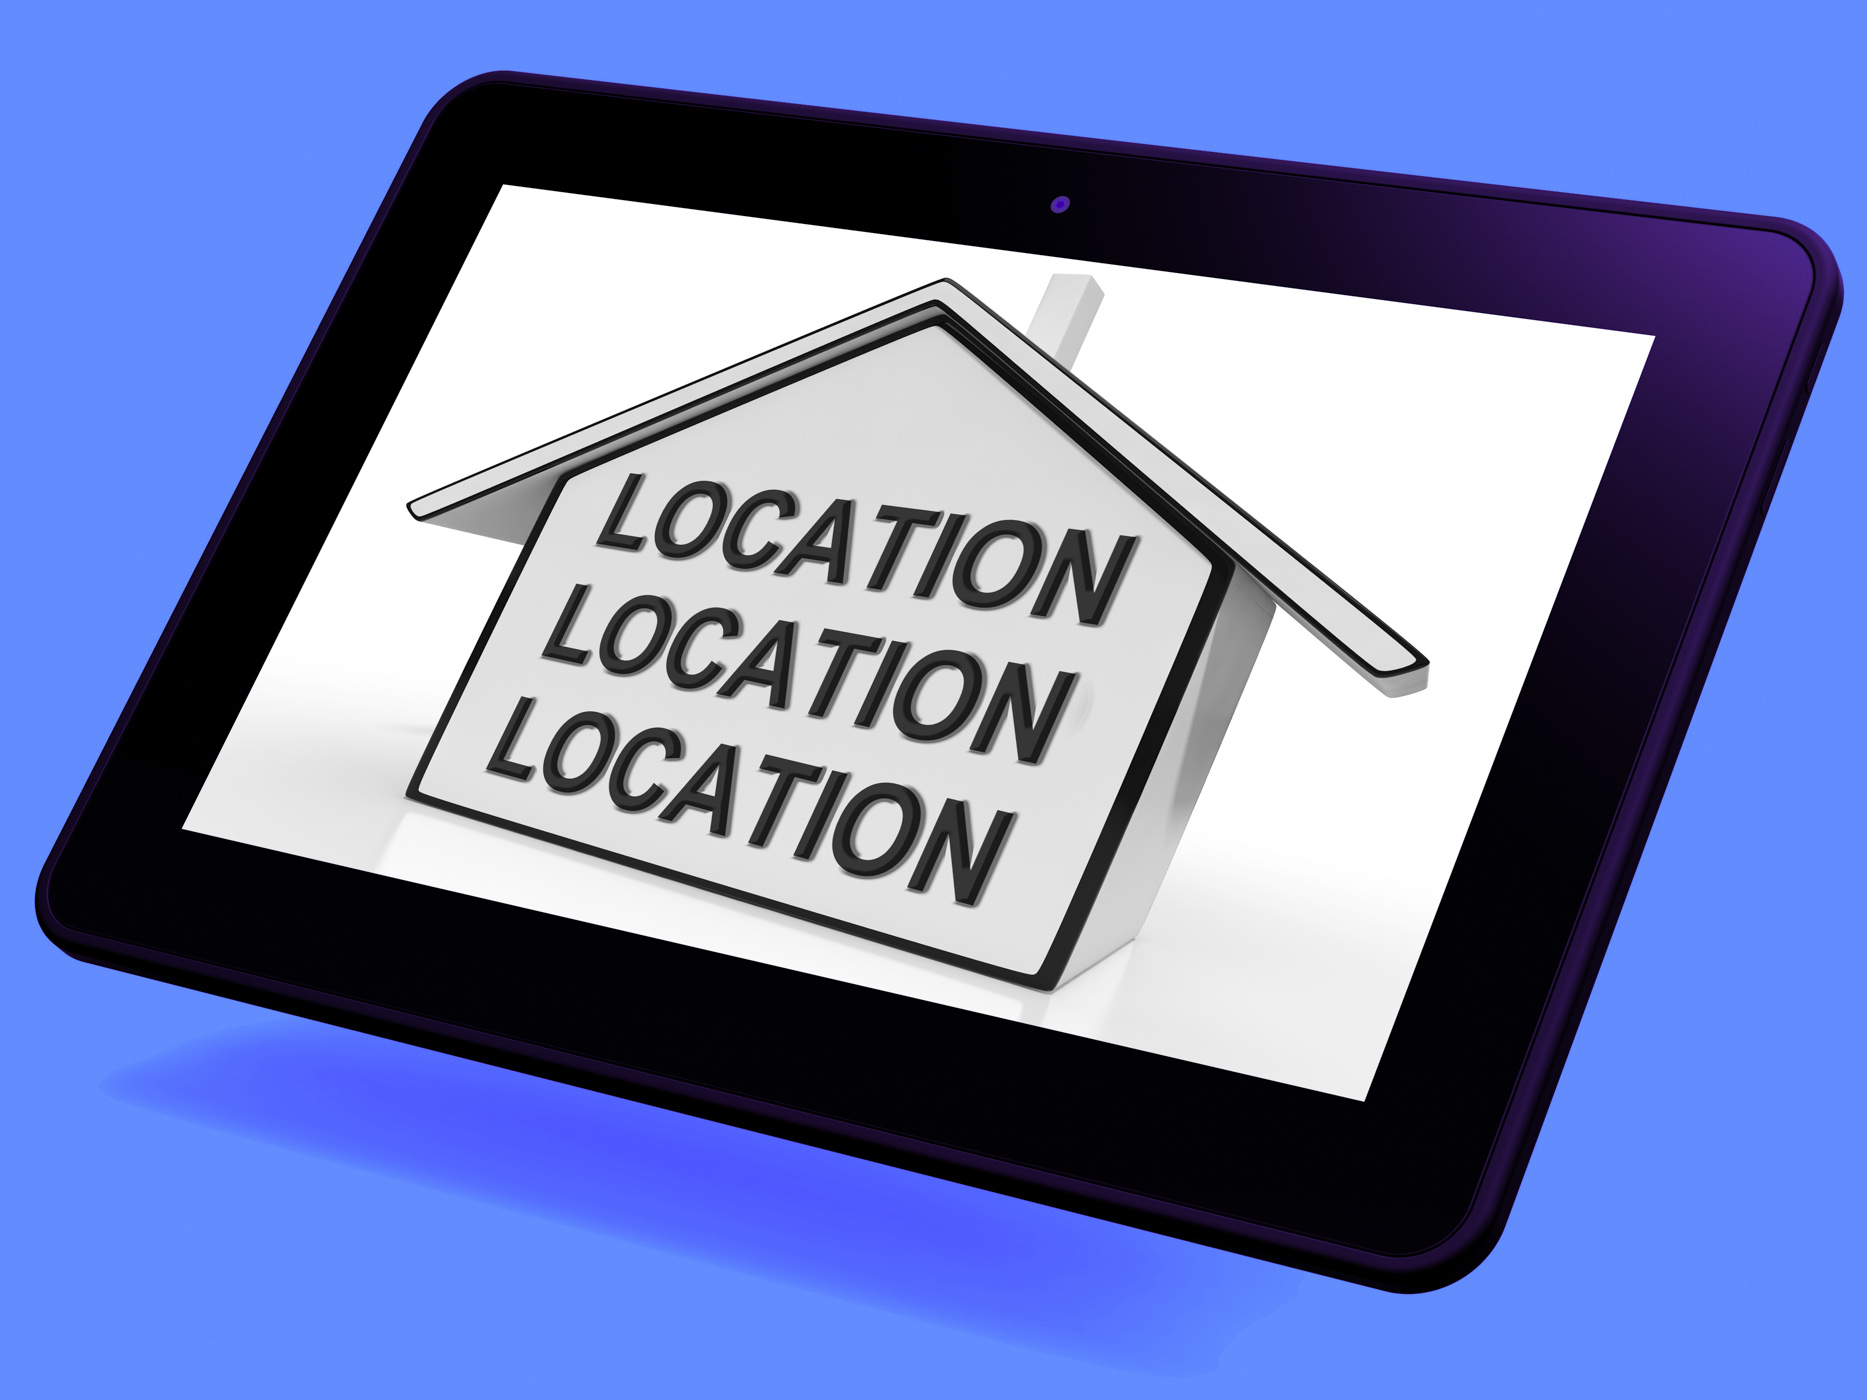 Location location location house tablet shows prime real estate photo